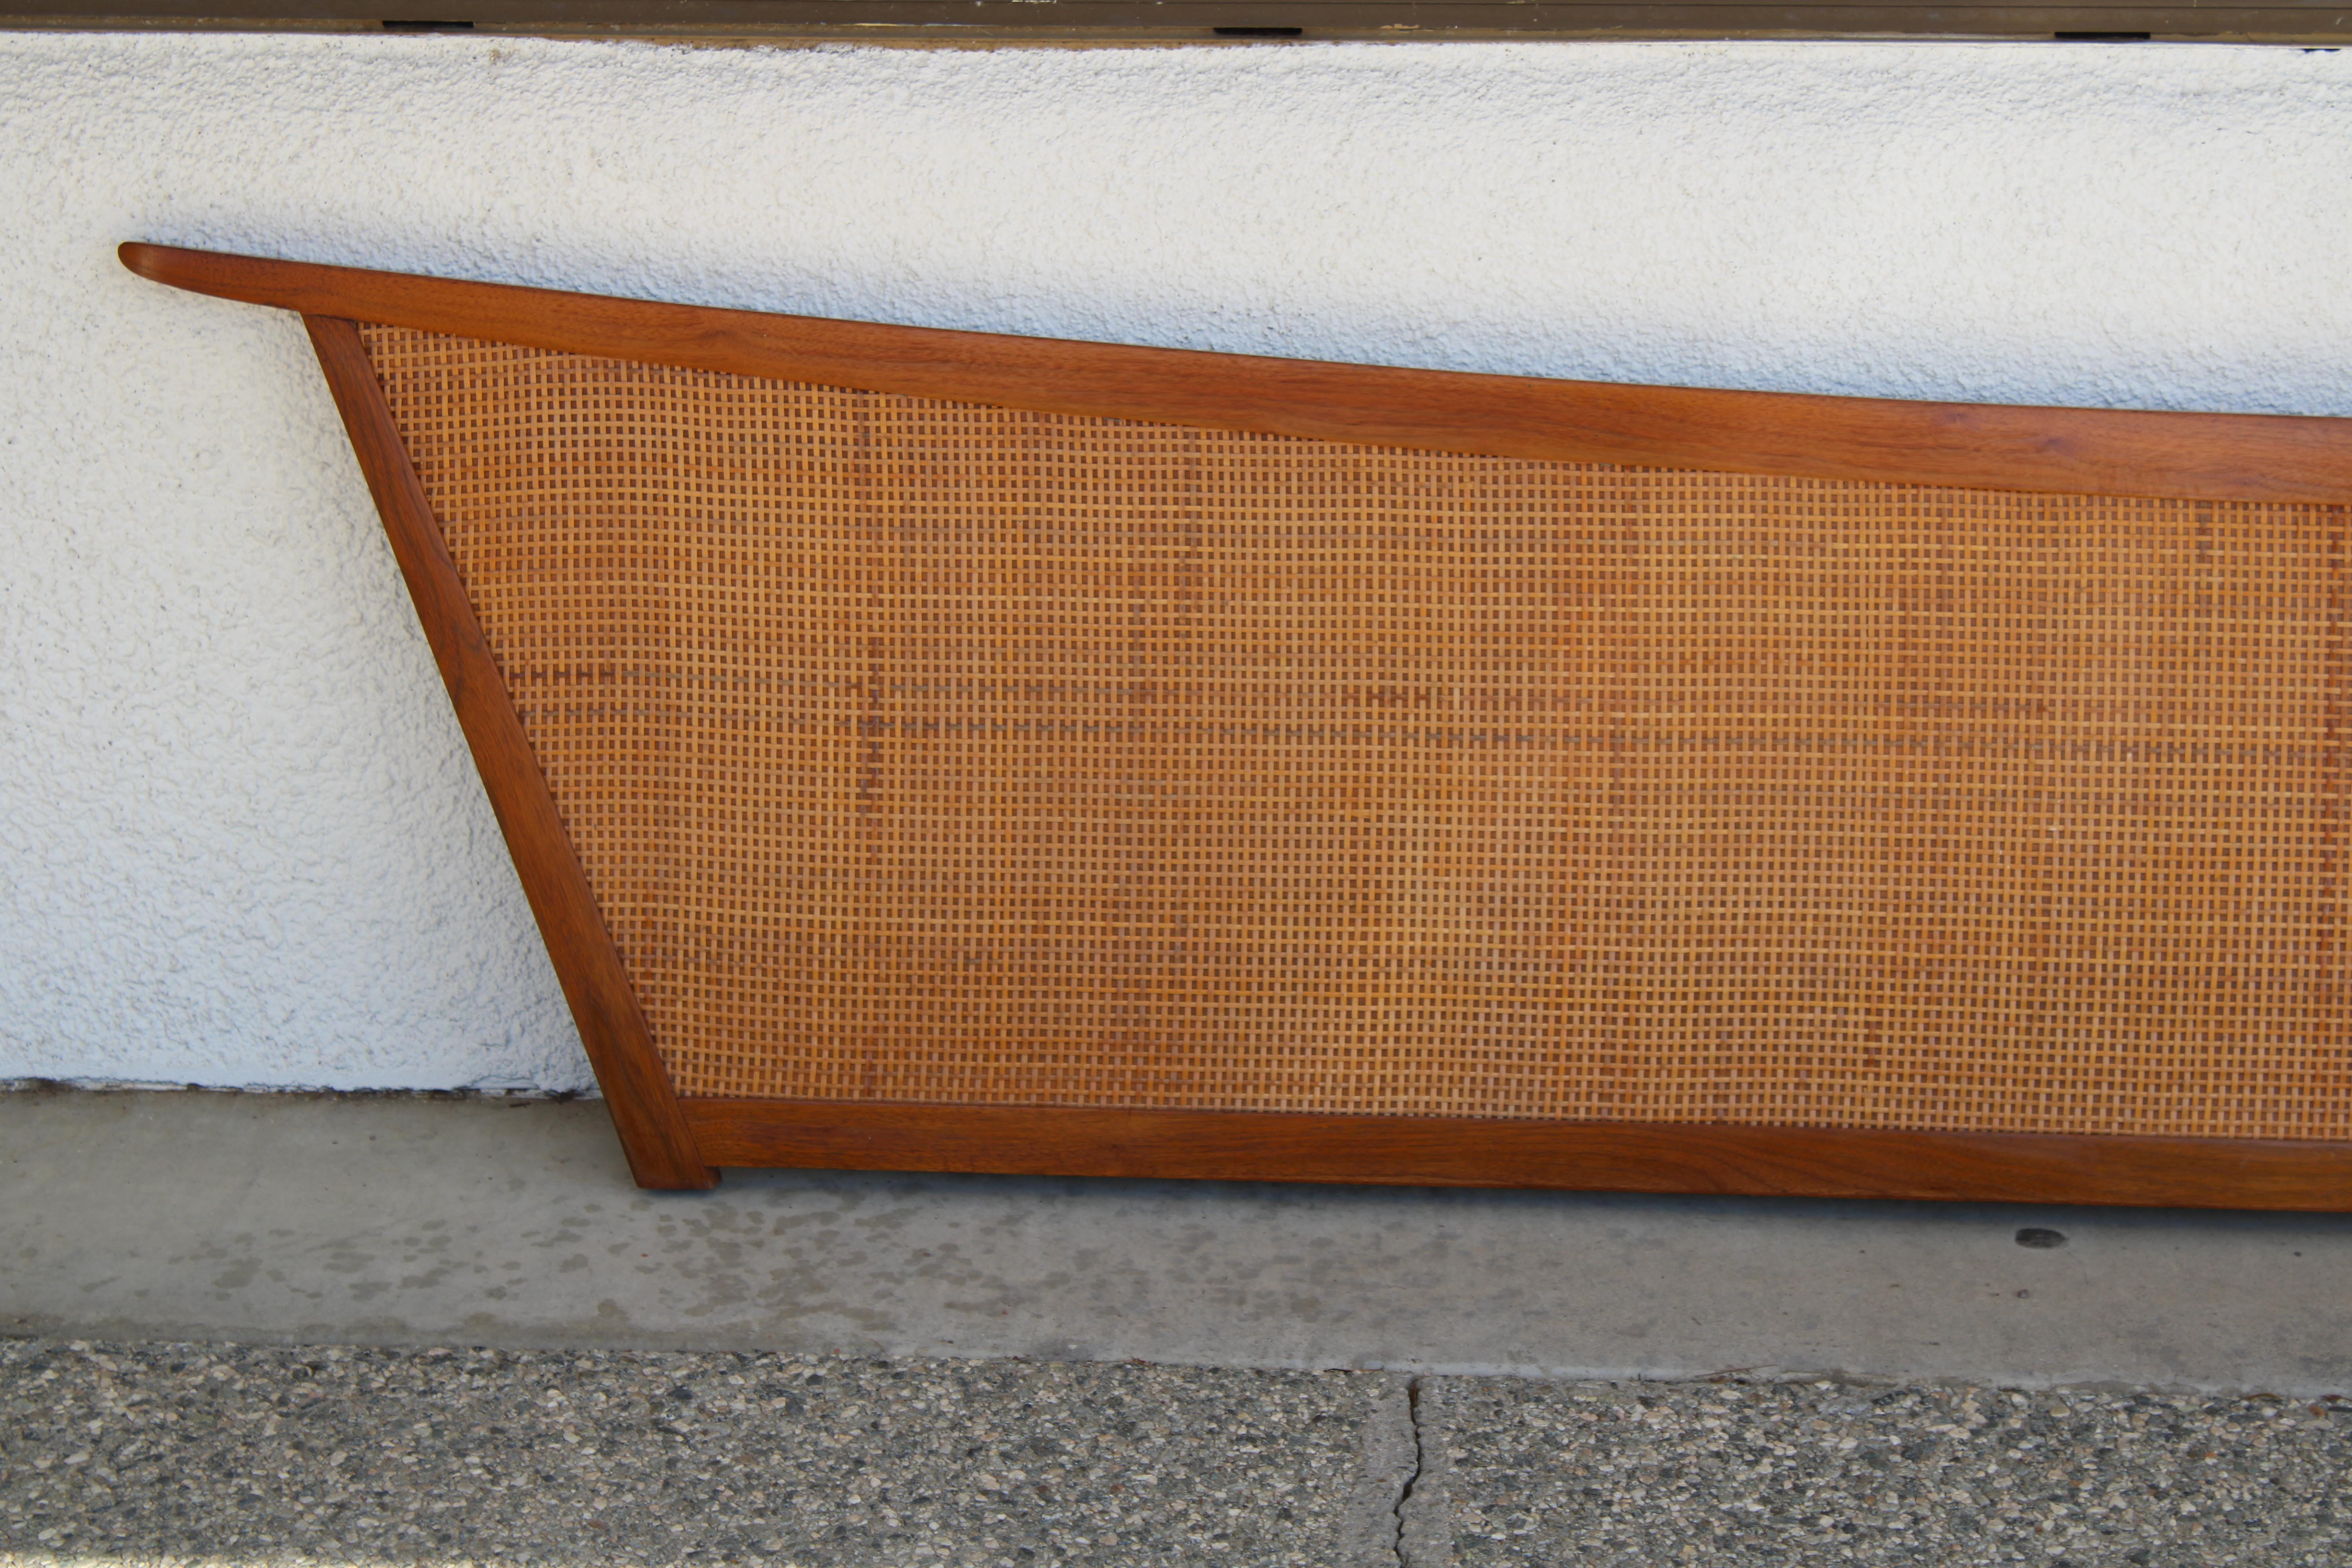 George Nakashima design headboard for a king size bed for his Origins series by Widdicomb.  Constructed of walnut with original woven cane panels.  This is just the headboard.  At one time there was the frame but the owners most likely preferred it